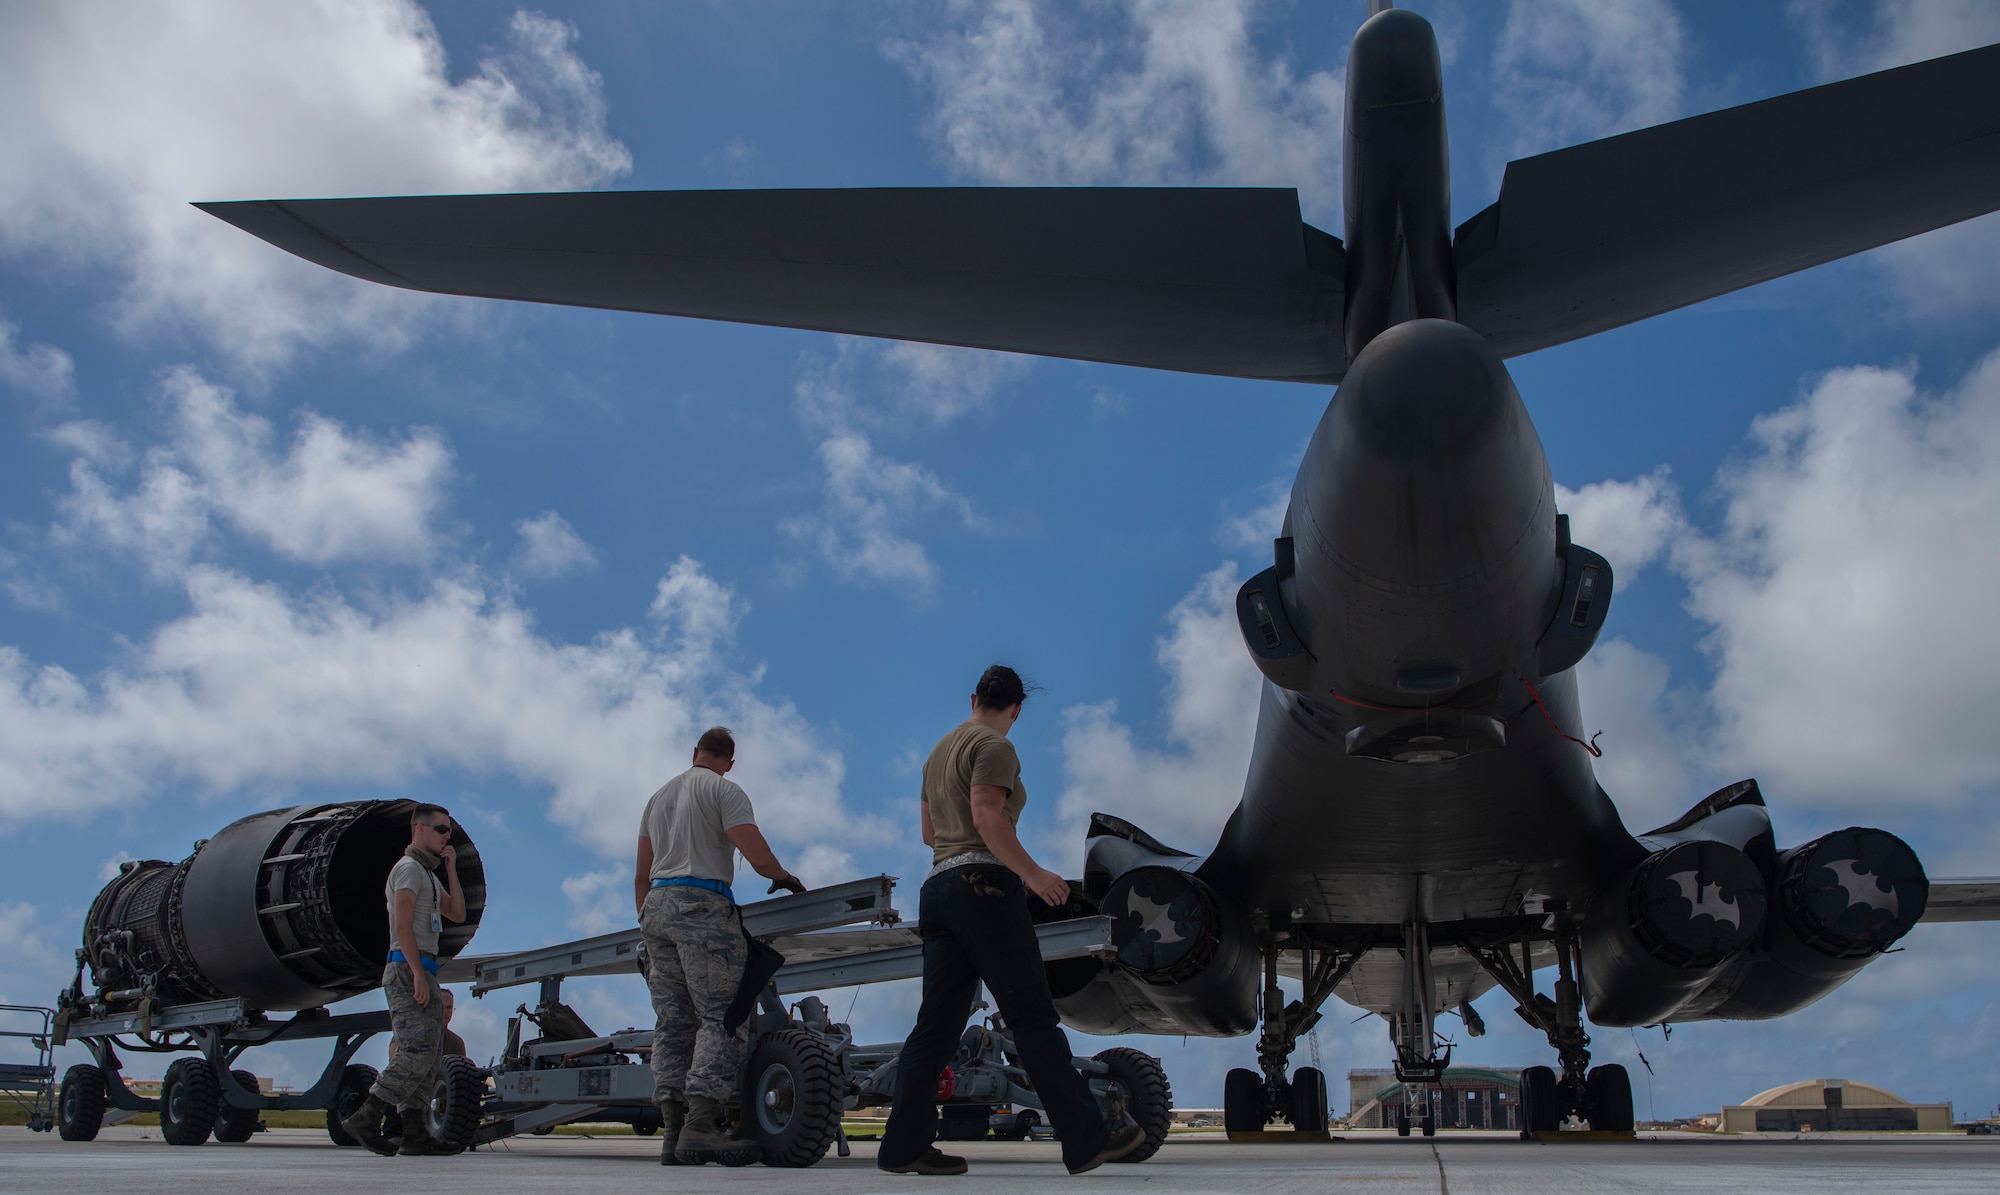 7th Aircraft Maintenance Squadron B-1B Lancer aircraft mechanics prepare to load an engine at Andersen Air Force Base, Guam, May 3, 2020. The B-1 carries four engines that help it reach speeds of more than 900 mph. A Bomber Task Force of four B-1s and approximately 200 Airmen deployed to Andersen as part of the Air Force’s dynamic force employment initiative. (U.S. Air Force photo by Senior Airman River Bruce)